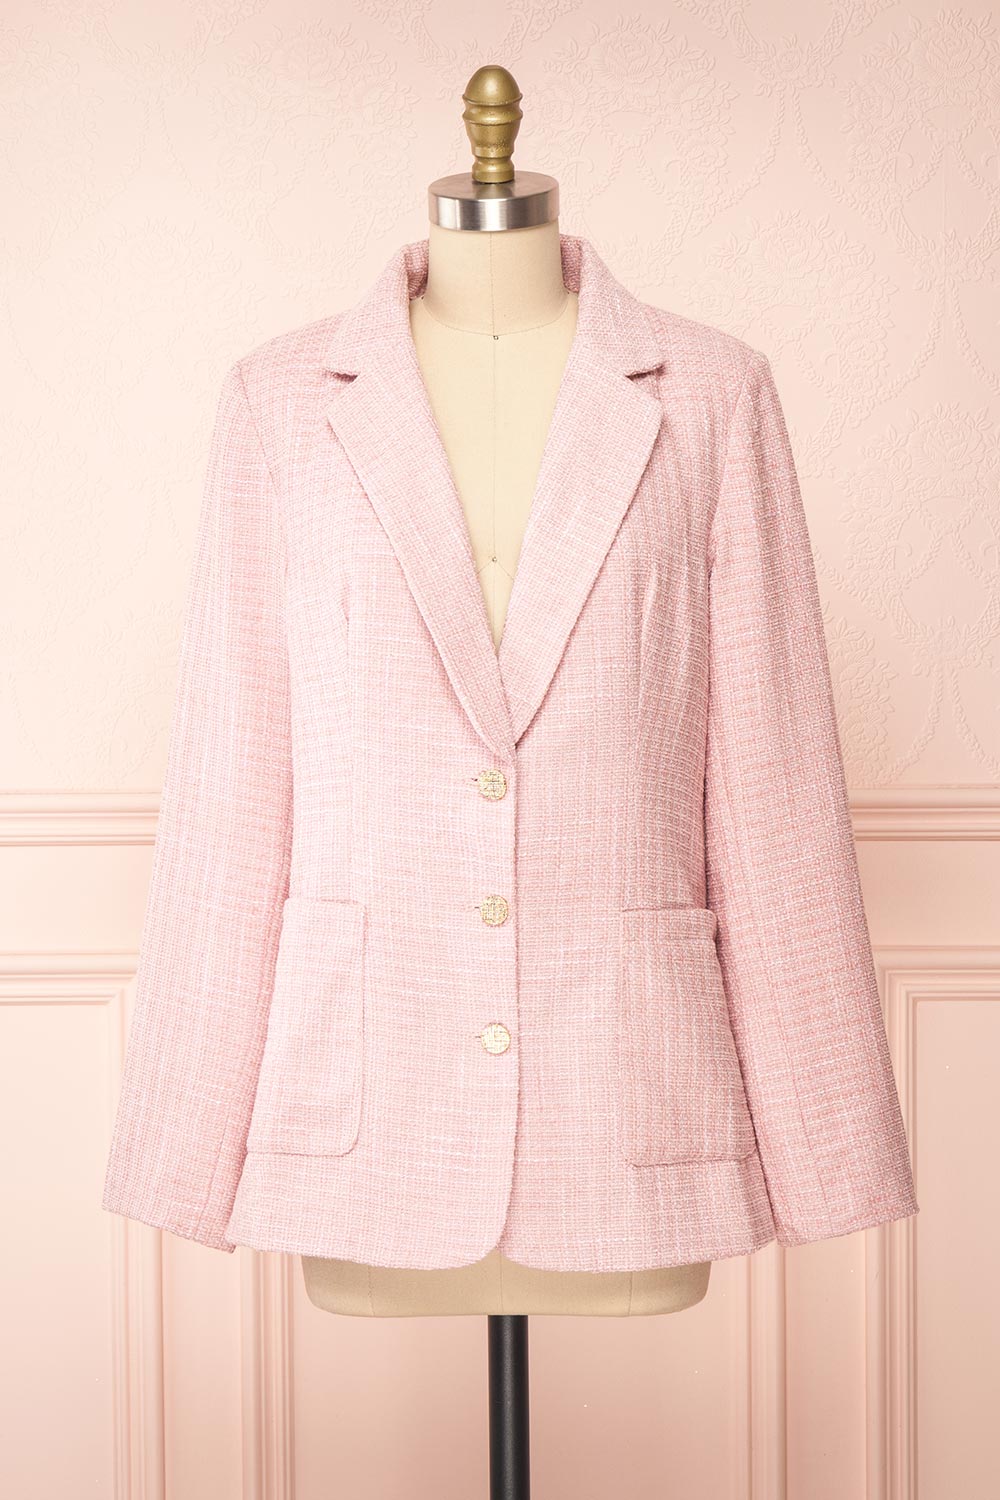 Dionne Pink Vintage Style Tweed Blazer | Boutique 1861 front view